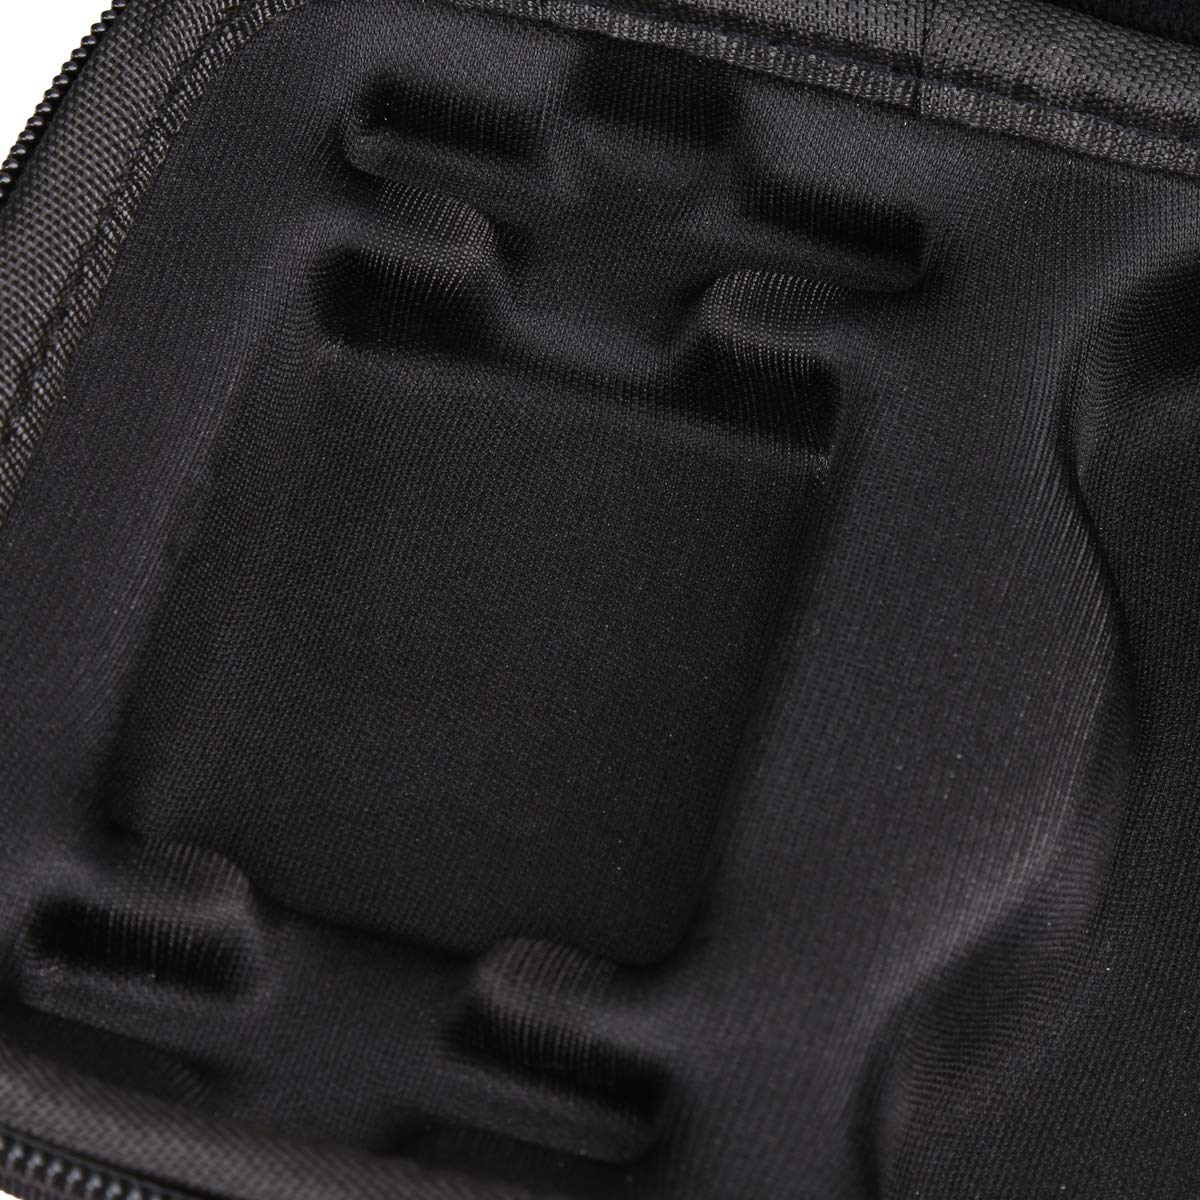 Hard Carrying Case for Quadcopter Drone